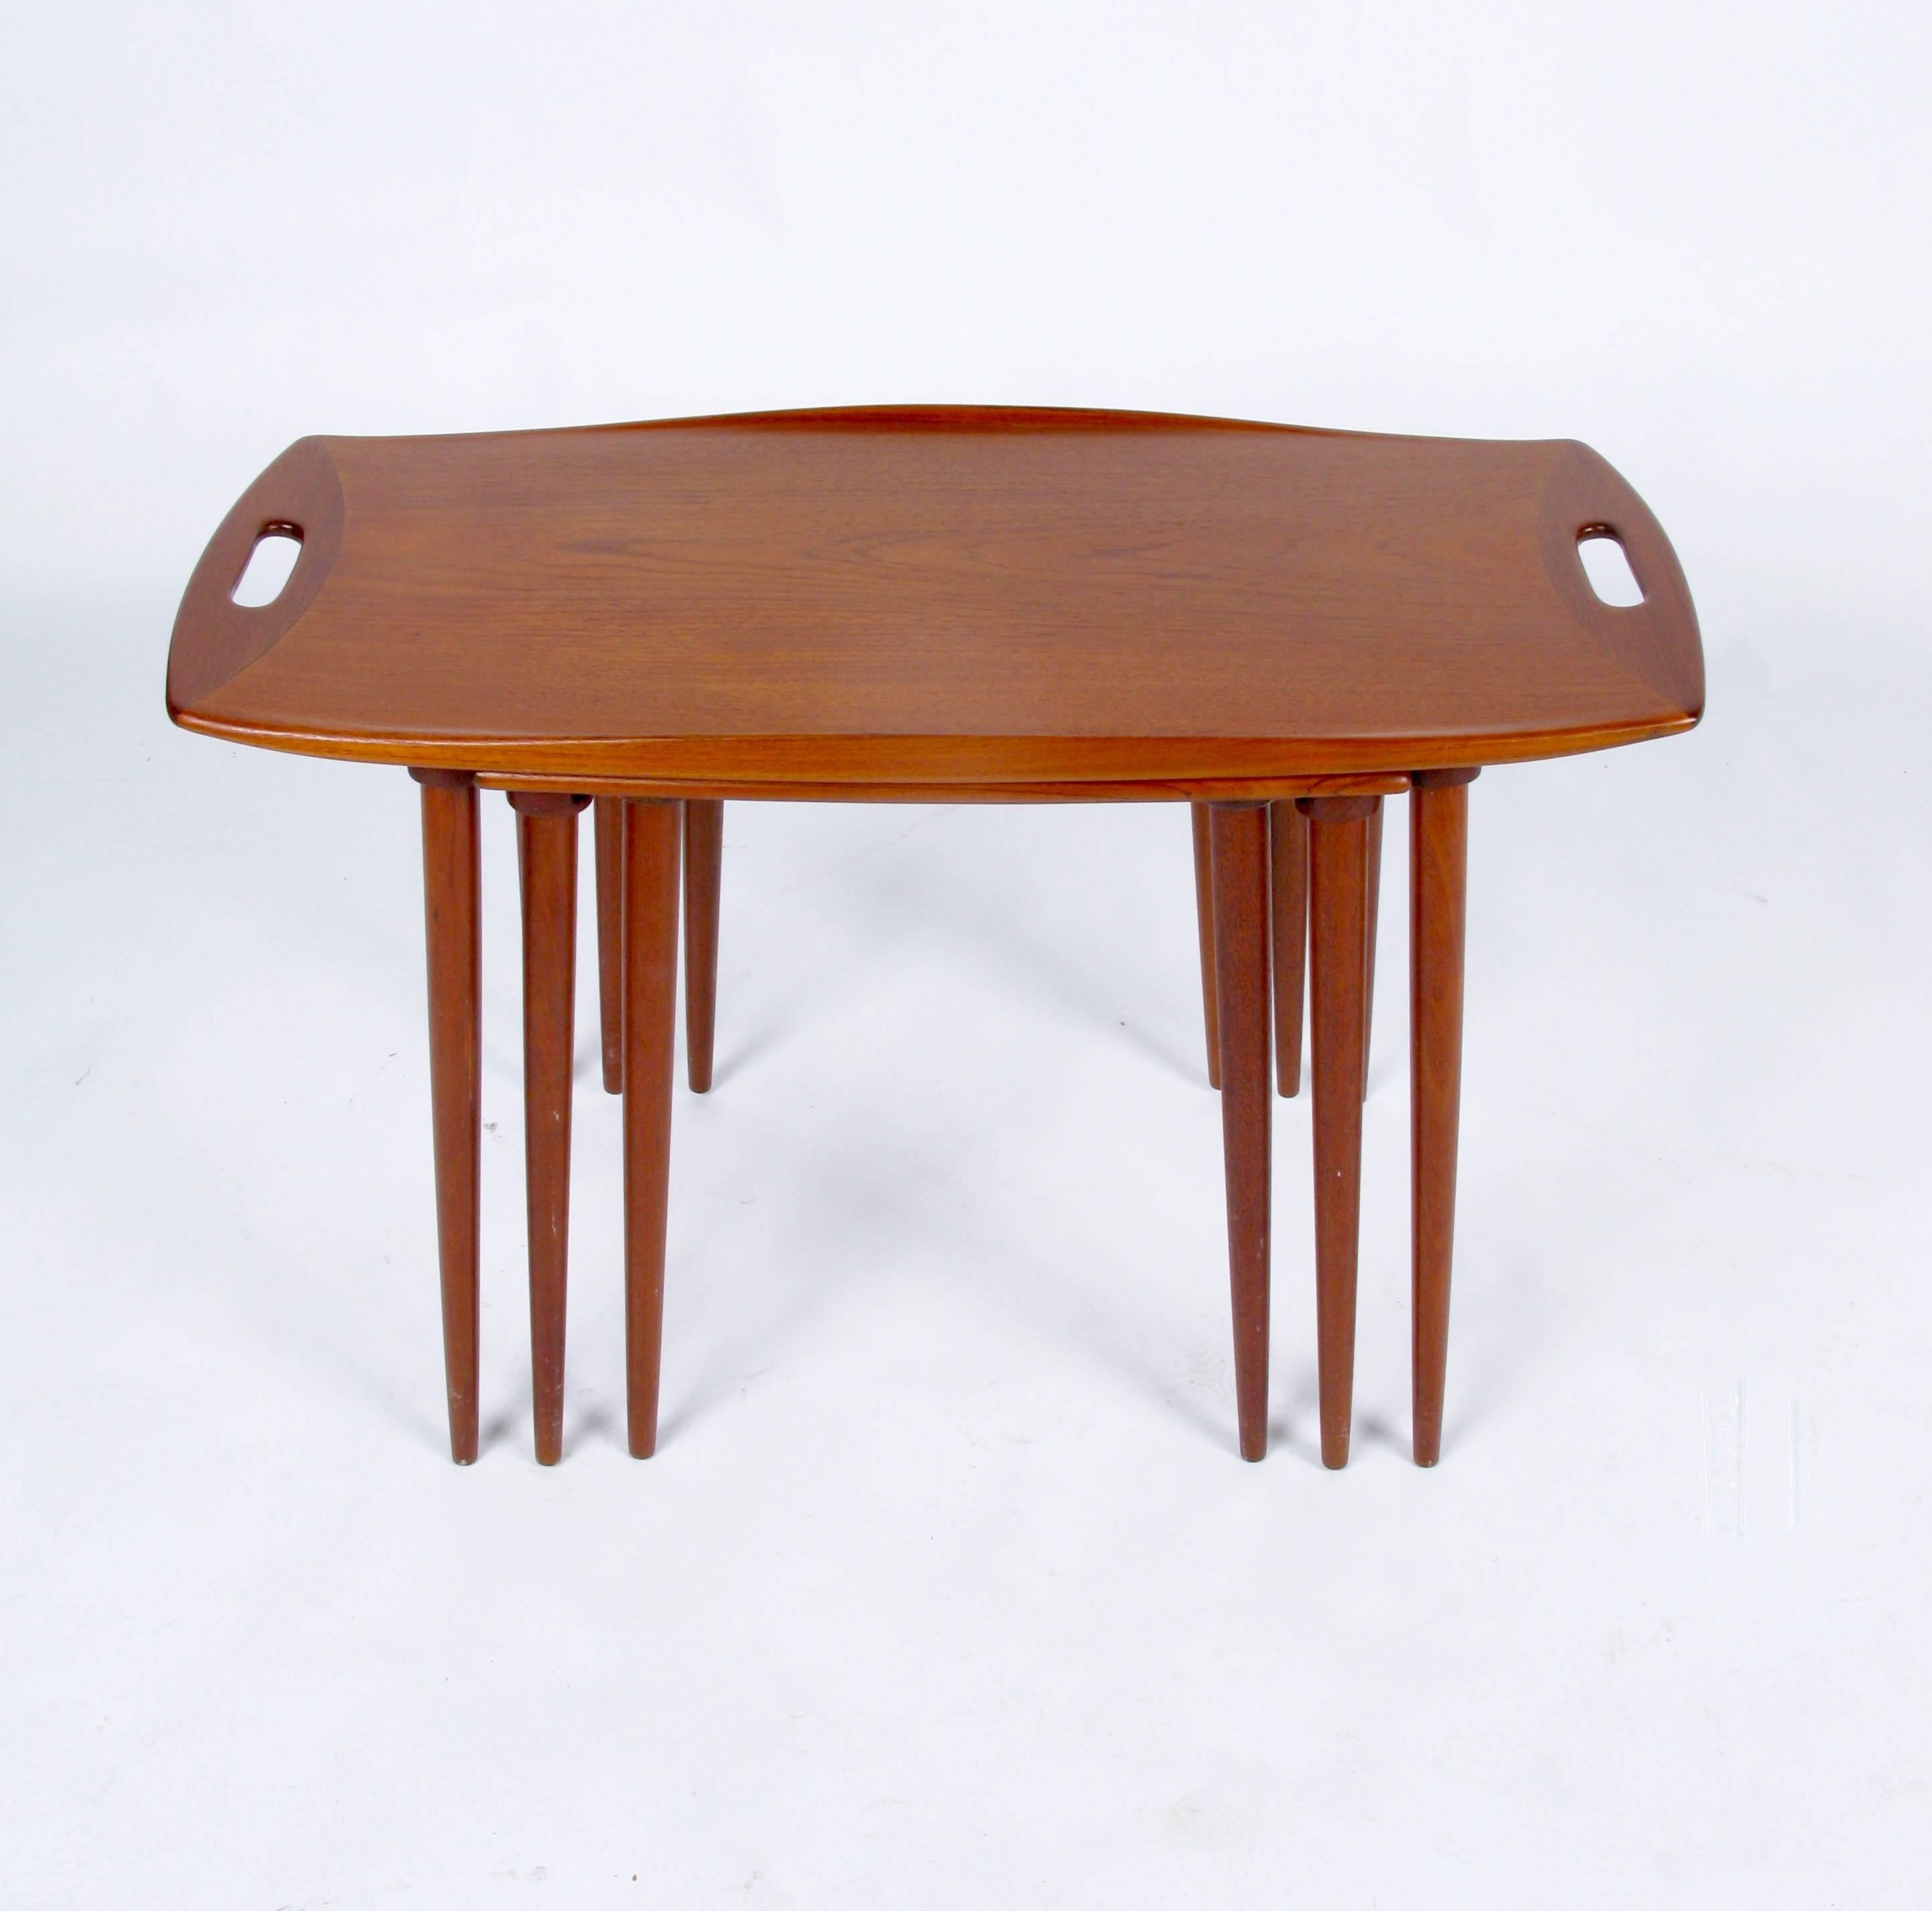 1950s set of three nest tables in oiled teak by Jens Quistgaard for Nissen, Denmark. The two larger tables each have a track for the lower table to slide into. Excellent restored condition.